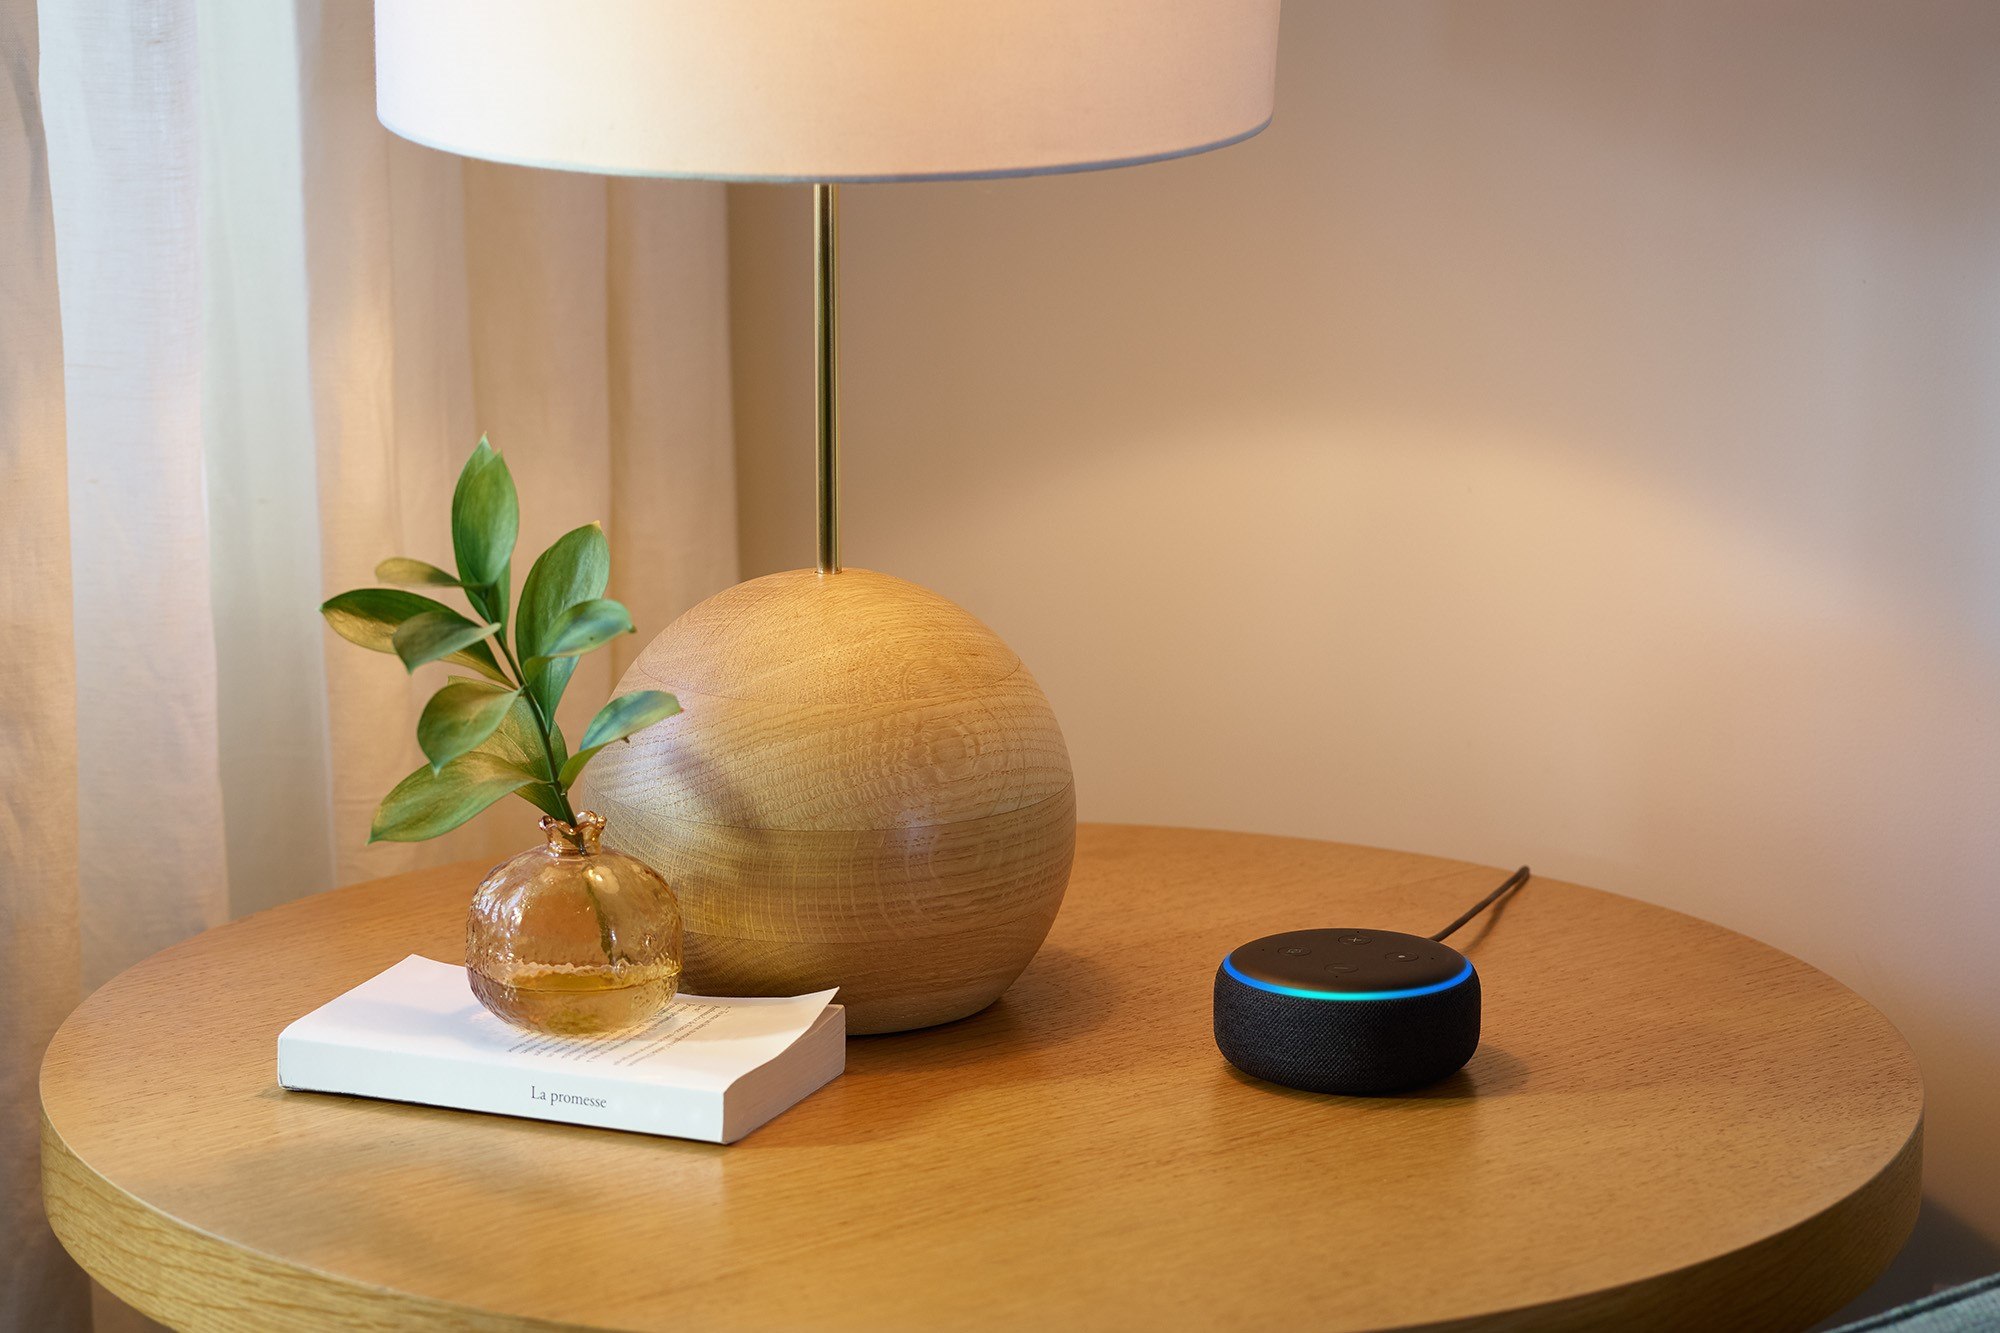 Why Won’t My Philips Hue Connect To Alexa